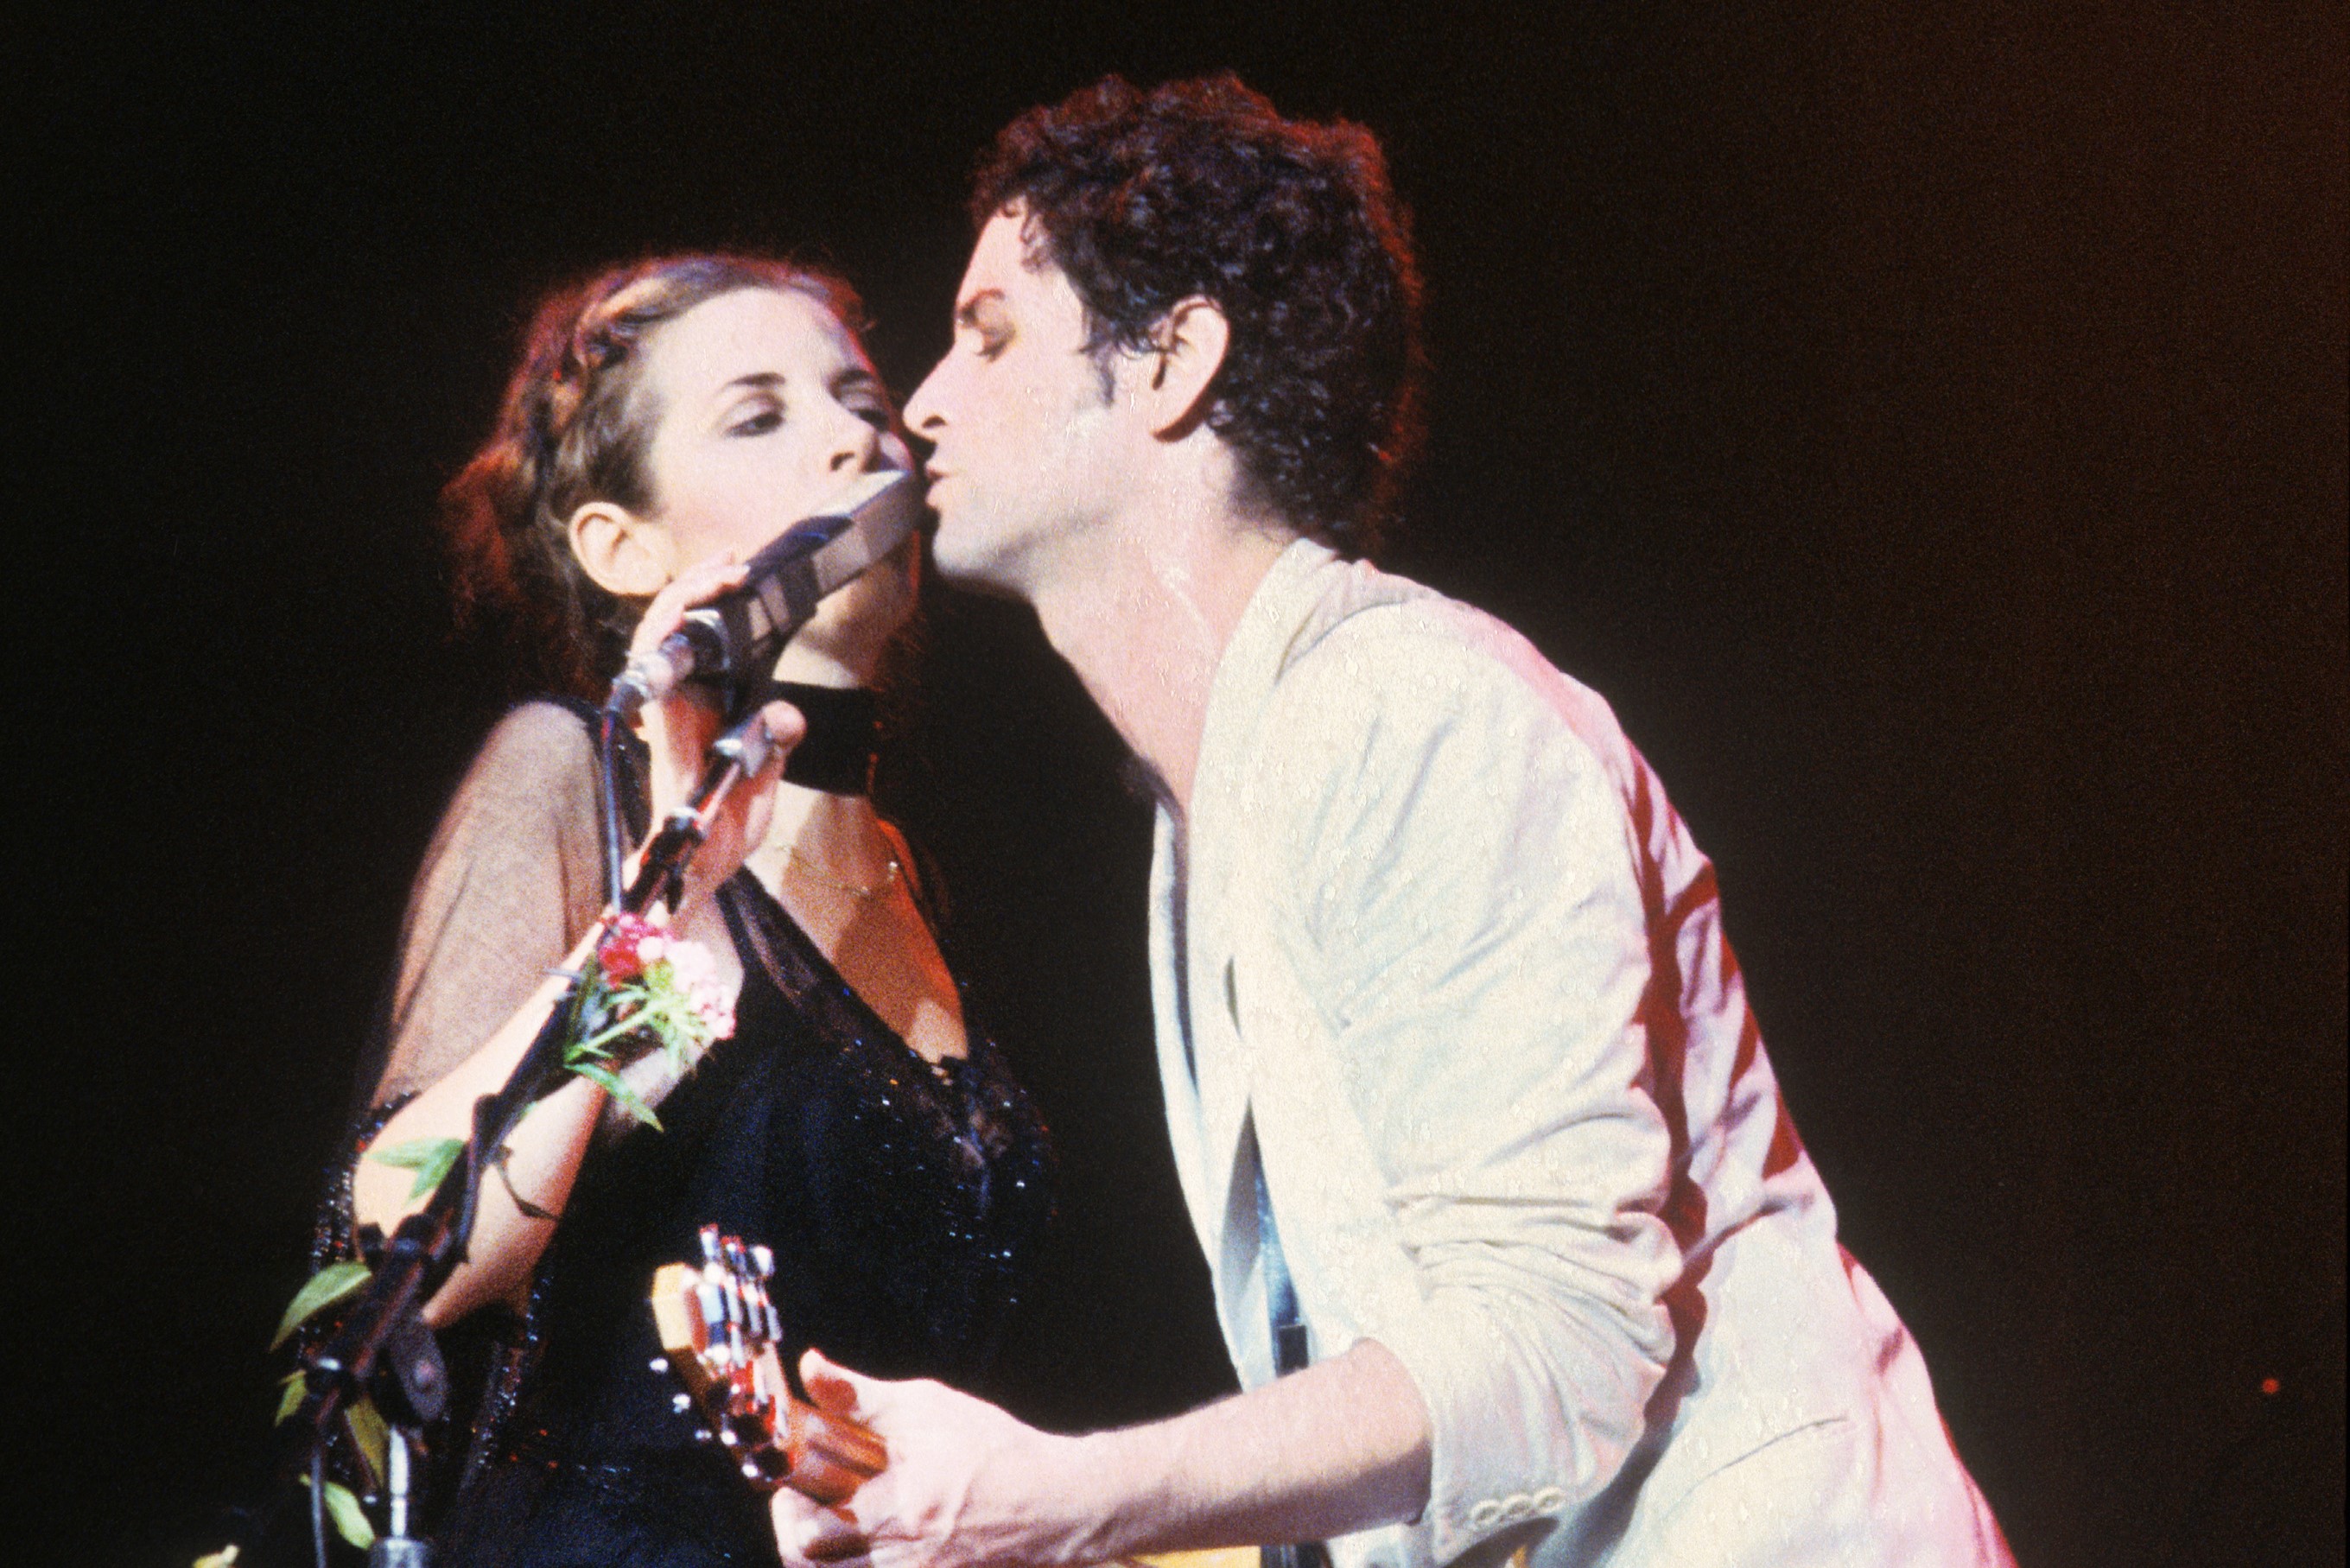 Stevie Nicks and Lindsey Buckingham sing into the same microphone.